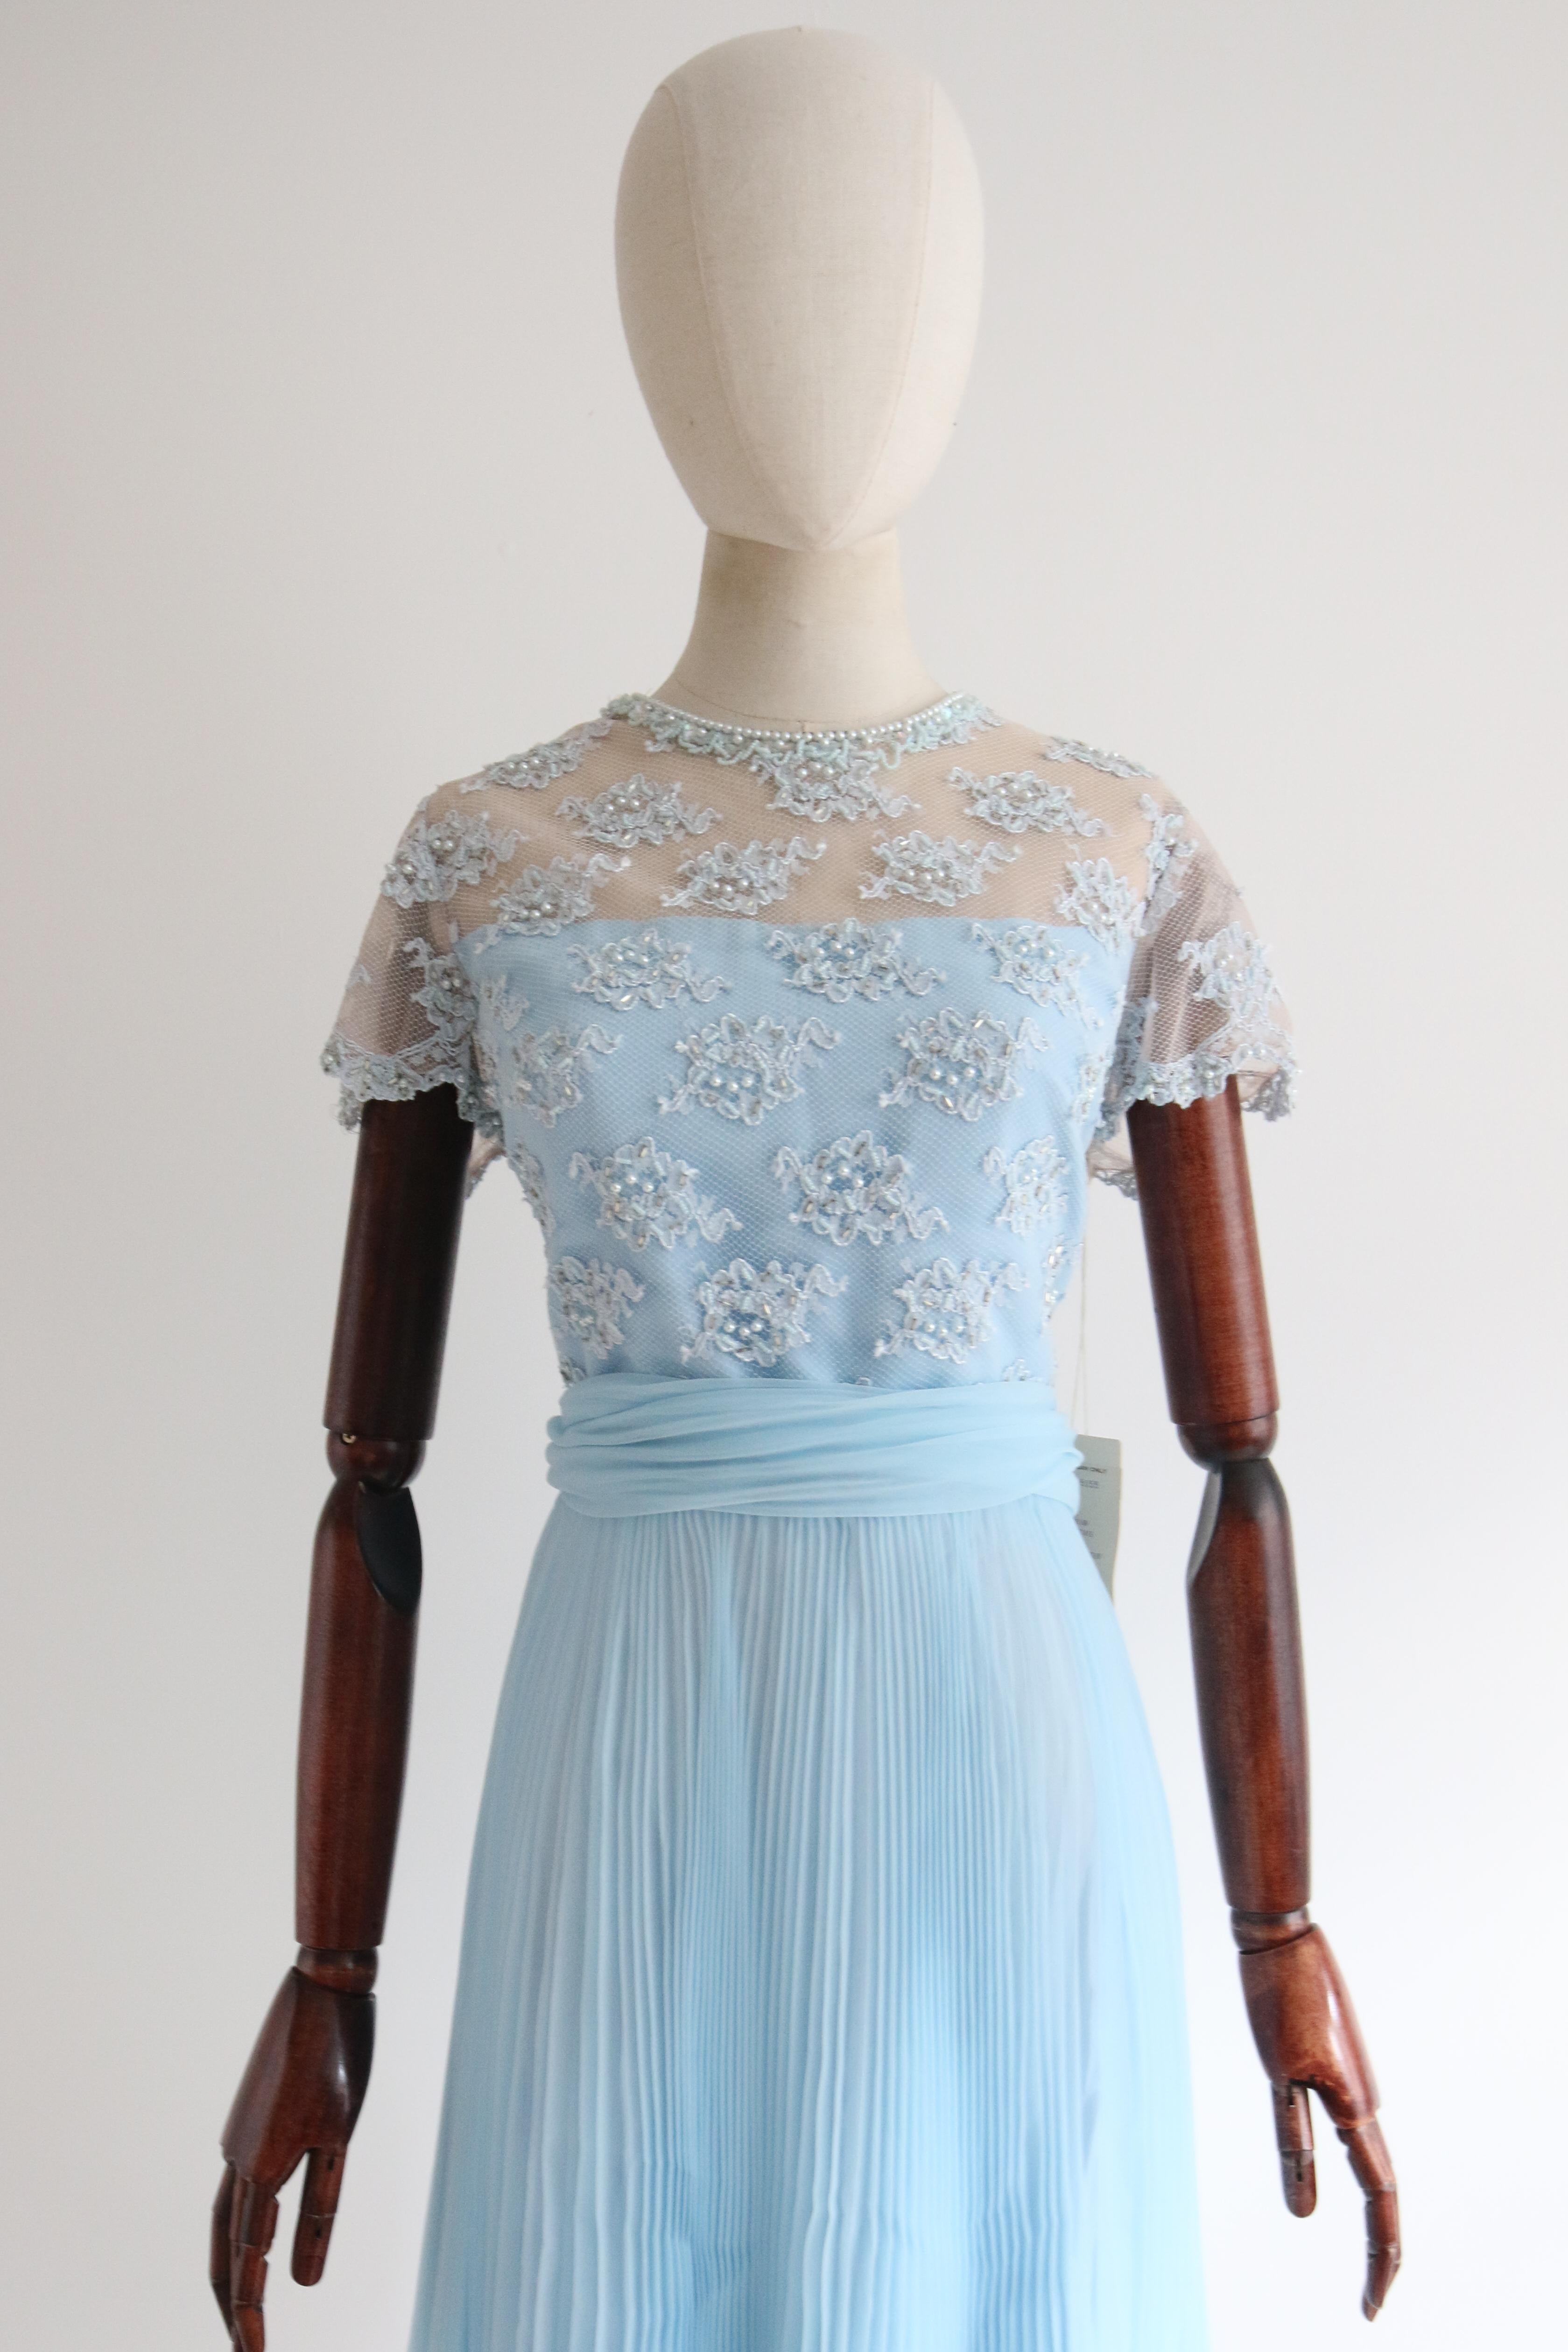 An eye-catching piece to behold this original 1960's dress, rendered in a blue floral lace which is in turn embellished with blue pearlescent beads, small pale blue glass bead and silver bugle beads, contrasting the effortless sky blue pleated